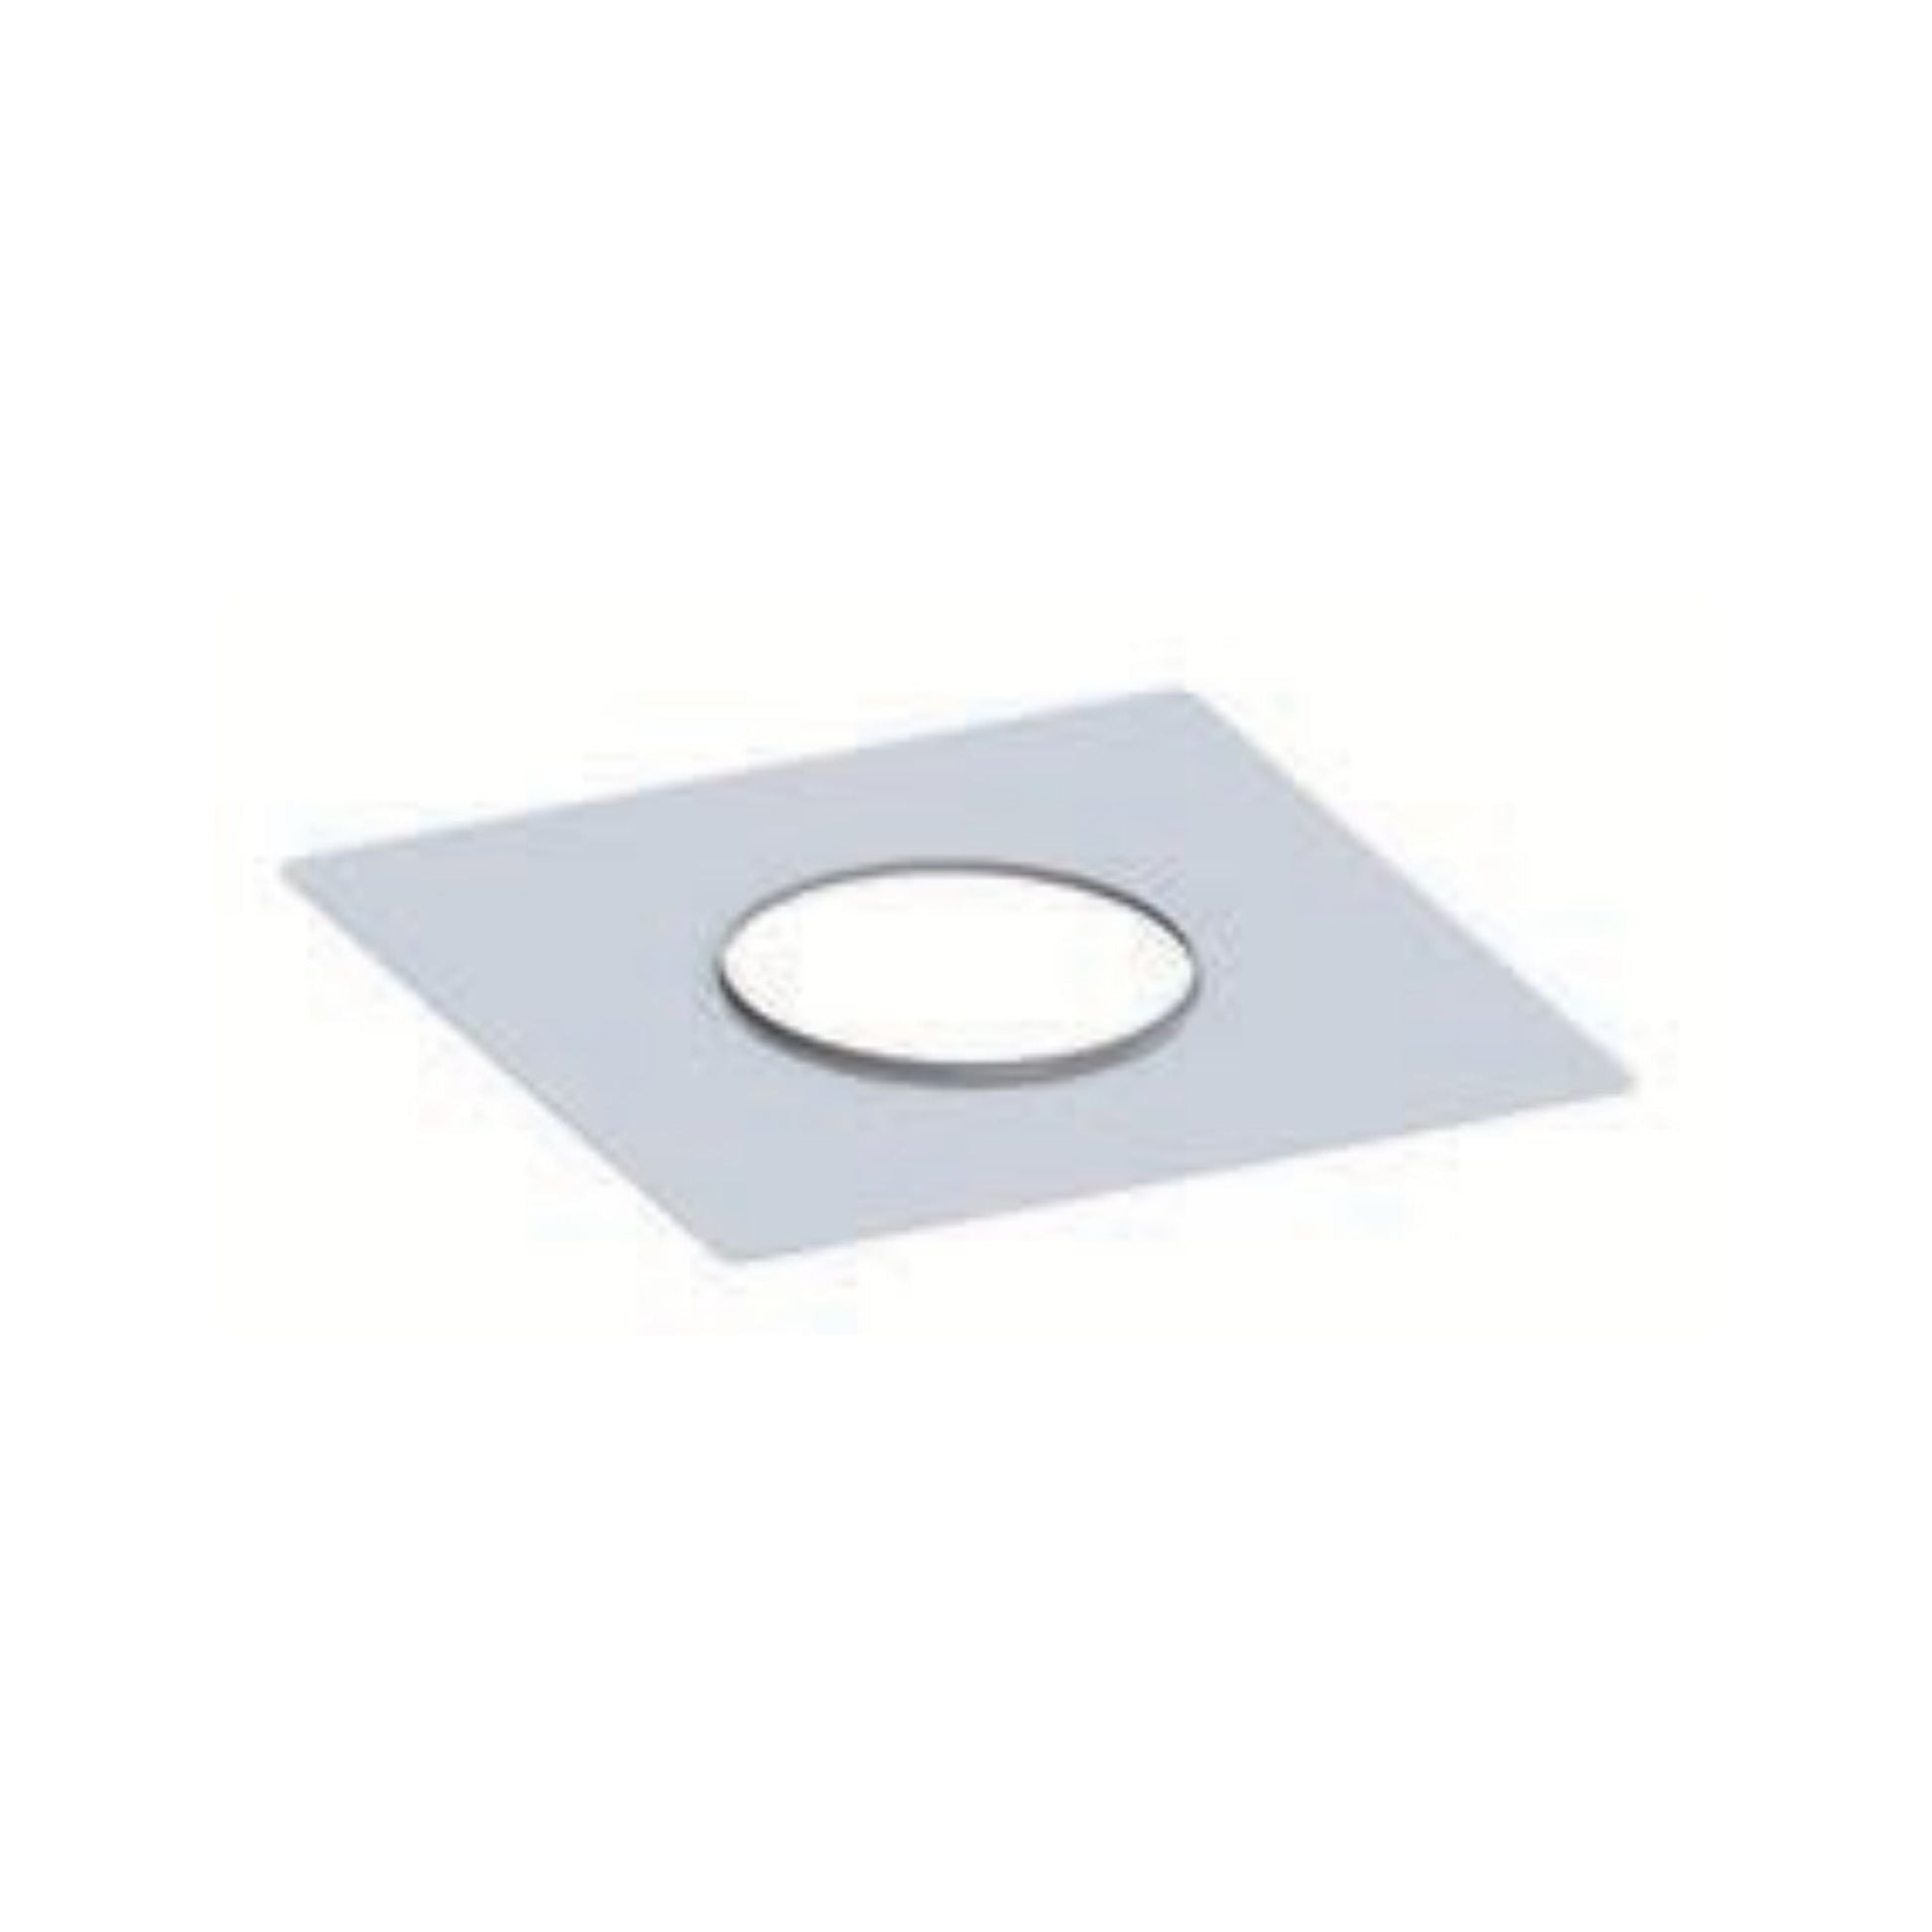 DuraVent FasNSeal Flex 2" Stainless Steel Top Cover Plate